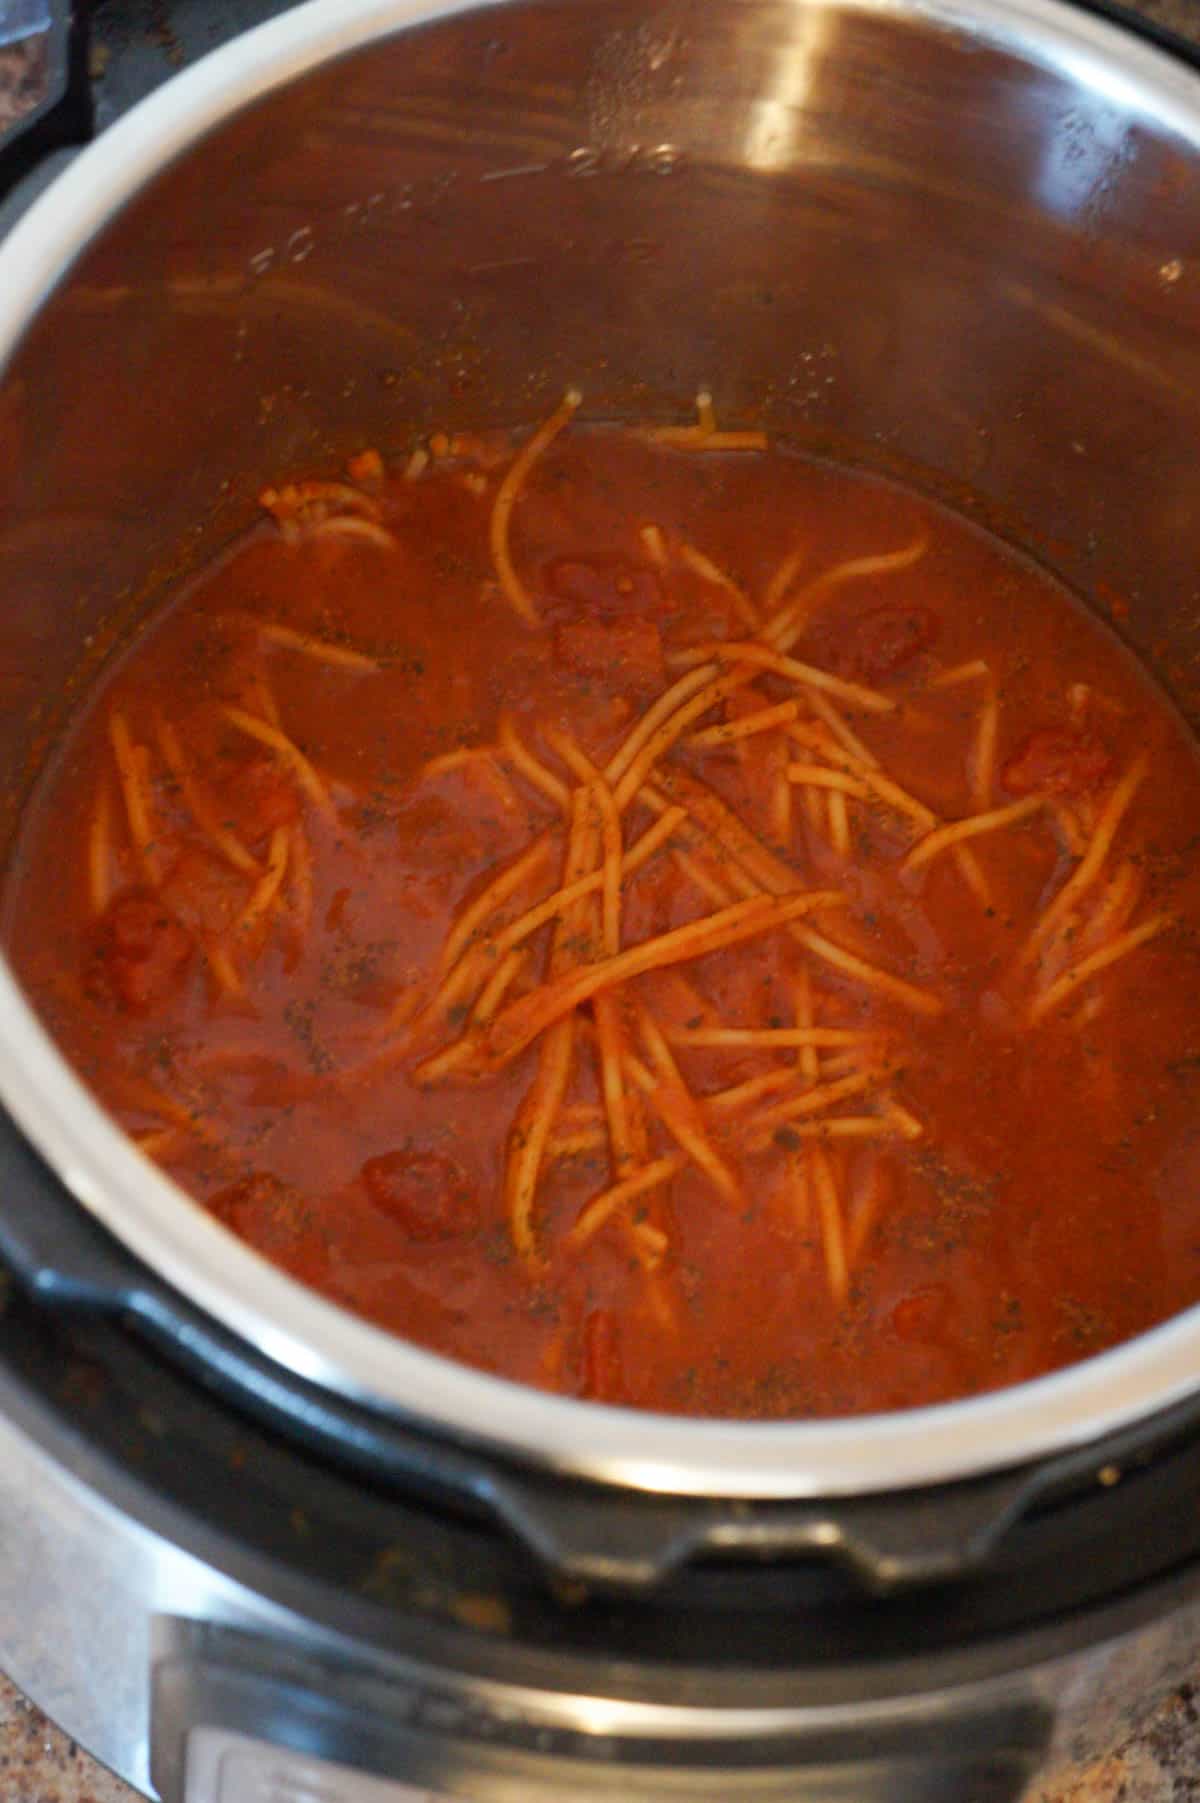 spaghetti and marinara sauce after cooking in an Instant Pot